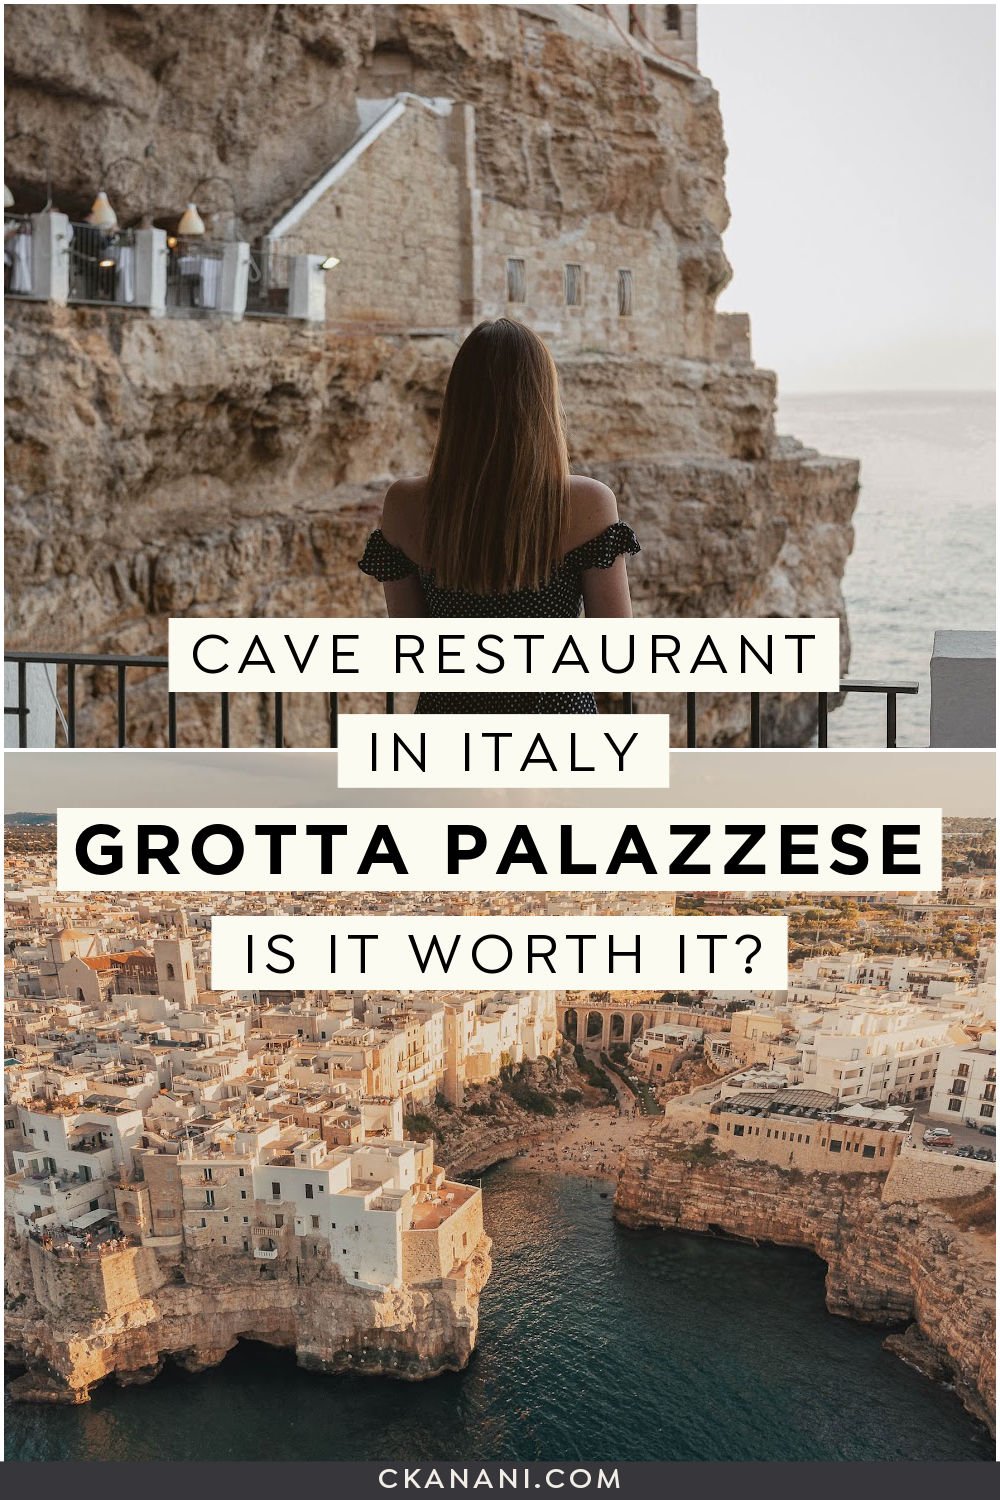 Grotta Palazzese: dining in a cave restaurant in Italy.  Italy restaurant cave, Italian restaurant in a cave, Puglia holiday, Puglia itinerary, Polignano a Mare restaurant, Puglia restaurant